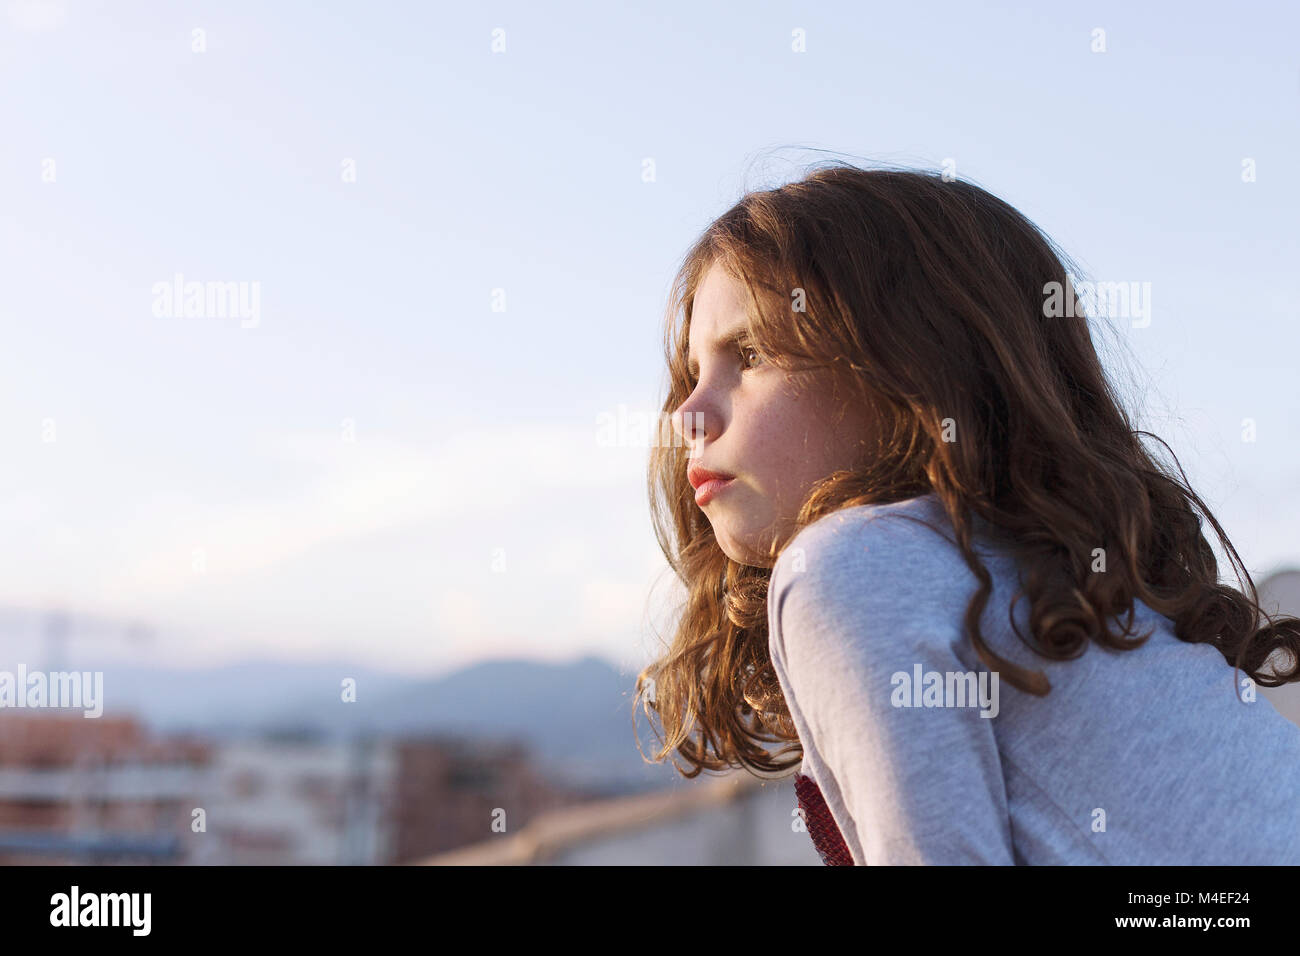 Portrait of a girl looking at view, Granada, Andalucia, Spain Stock Photo